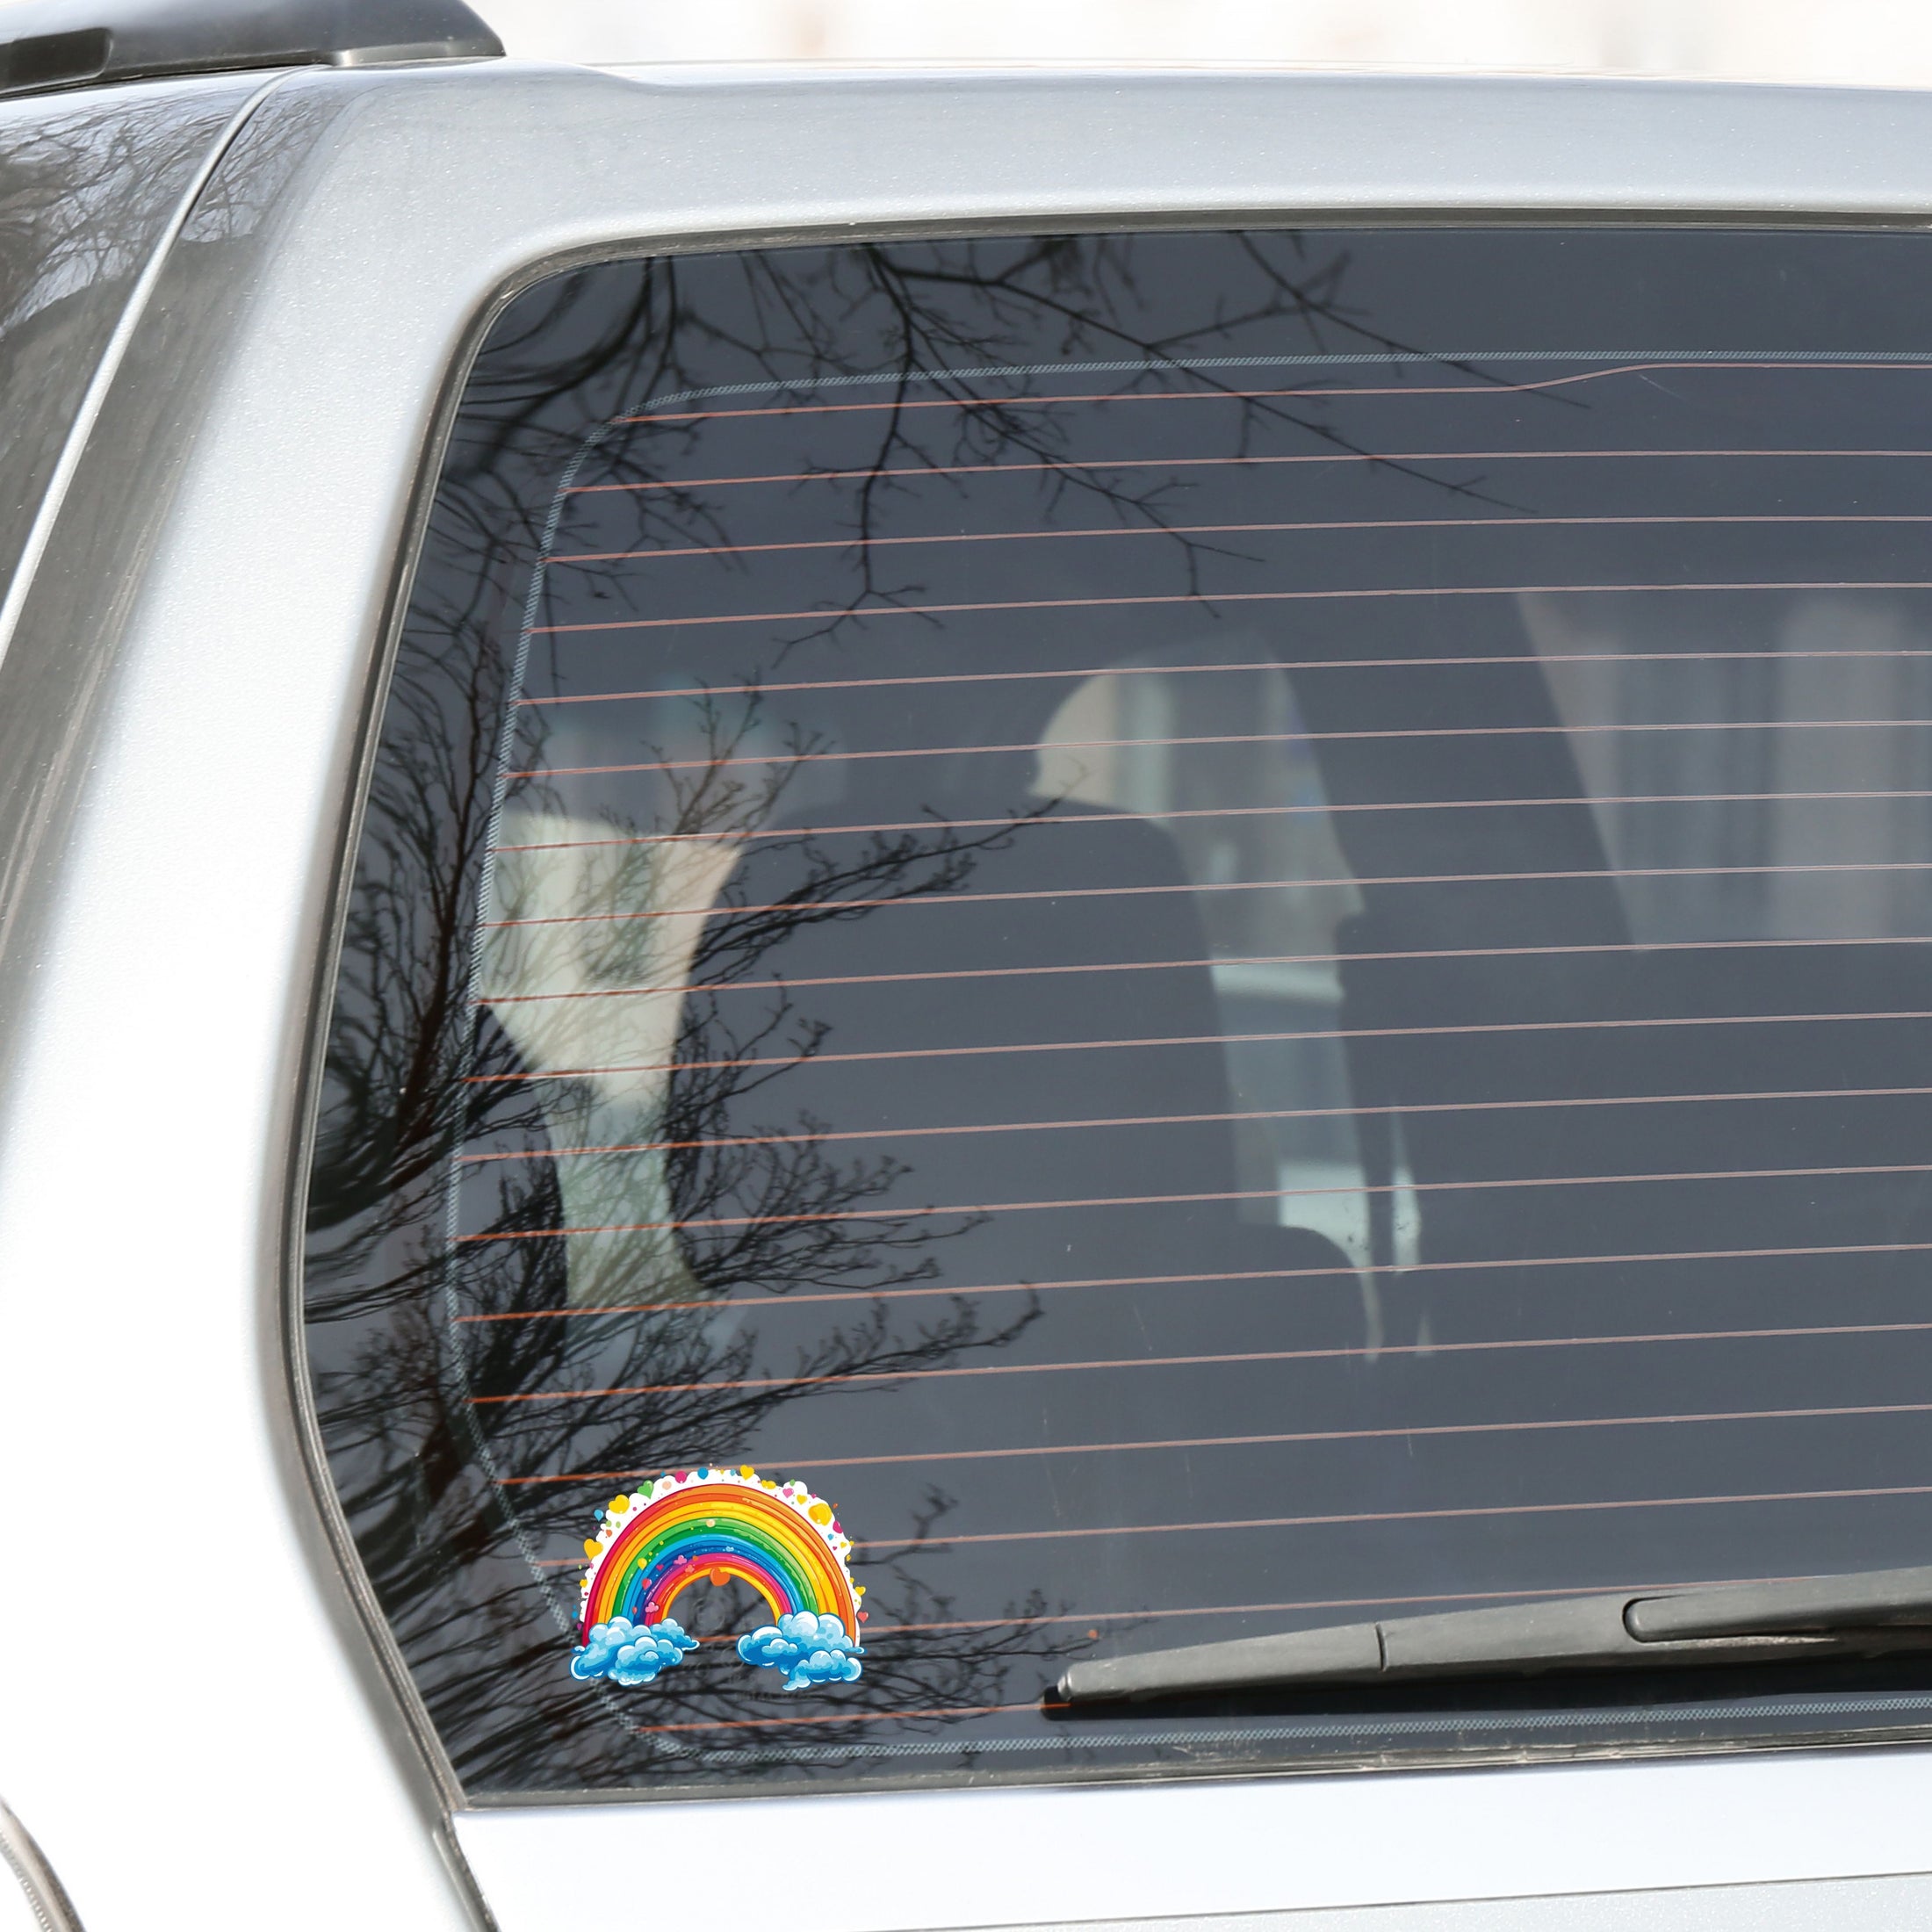 This image shows the rainbow and hearts sticker on the back window of a car.